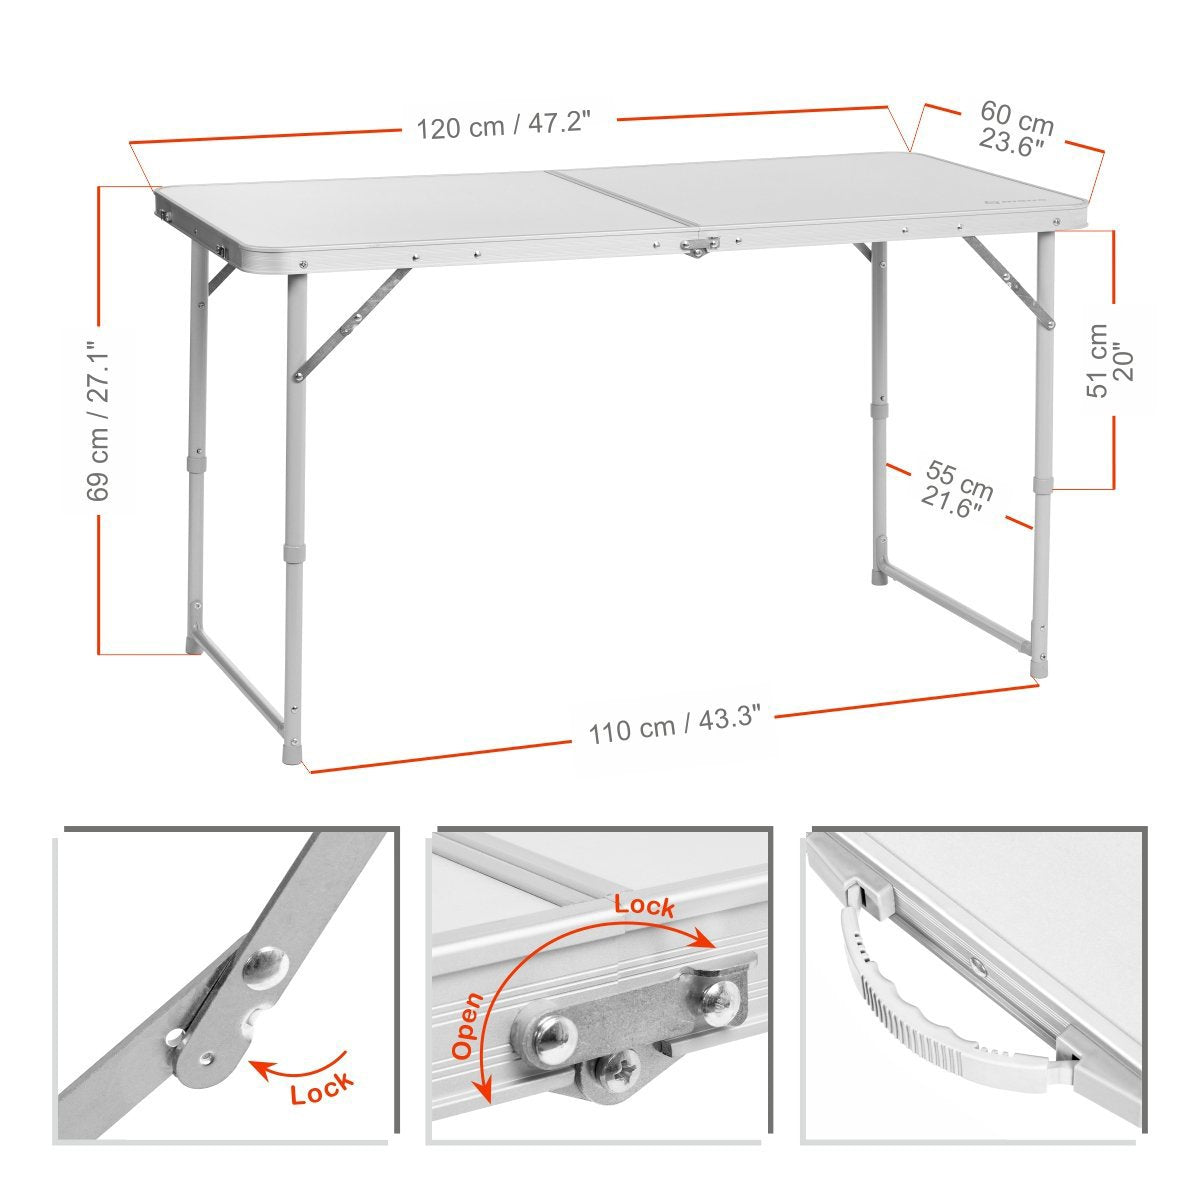 The Table is easily folding flat